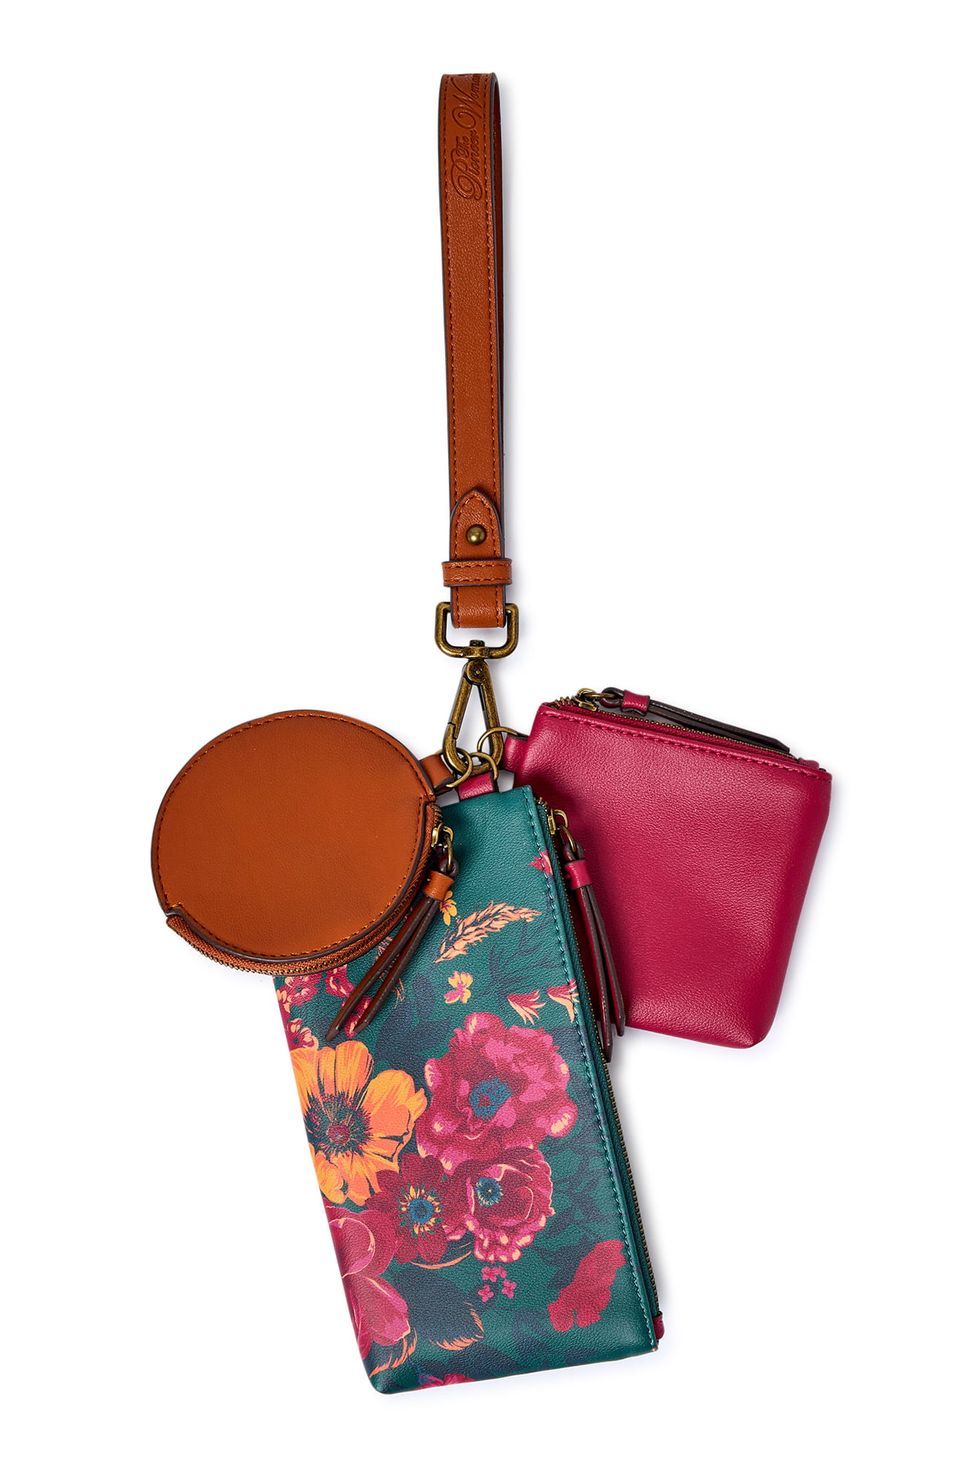 The Pioneer Woman's Floral Print Tri-Pouch Set